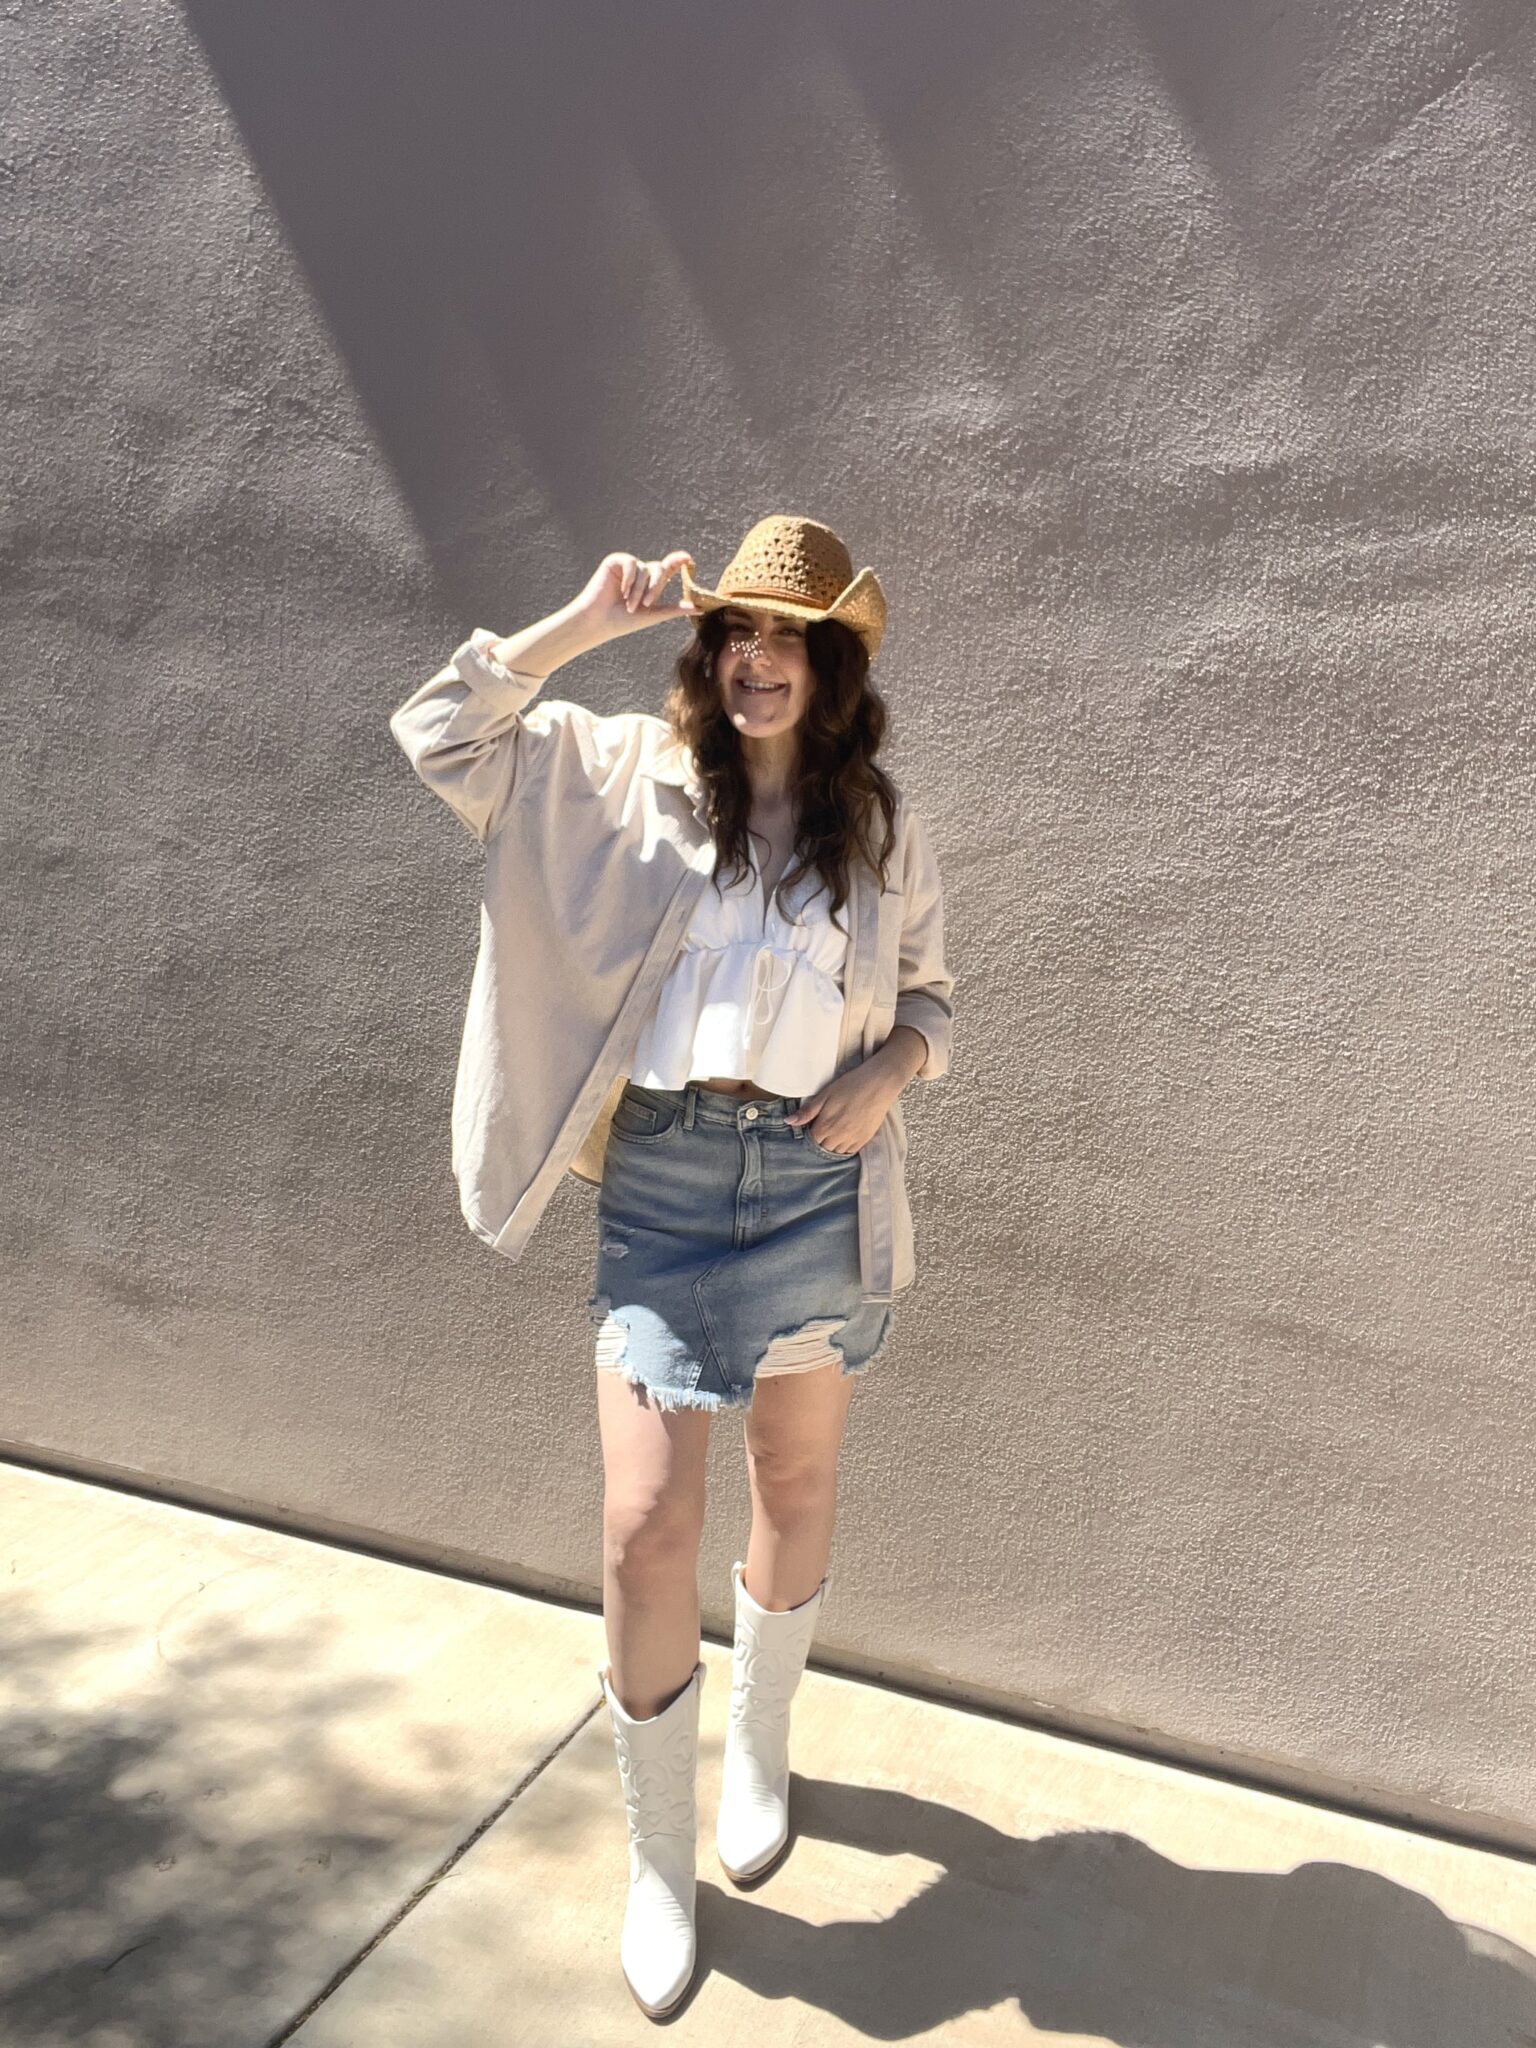 Coastal-Cowgirl Aesthetic: How to Dress the Trend Cheap - Fashnfly